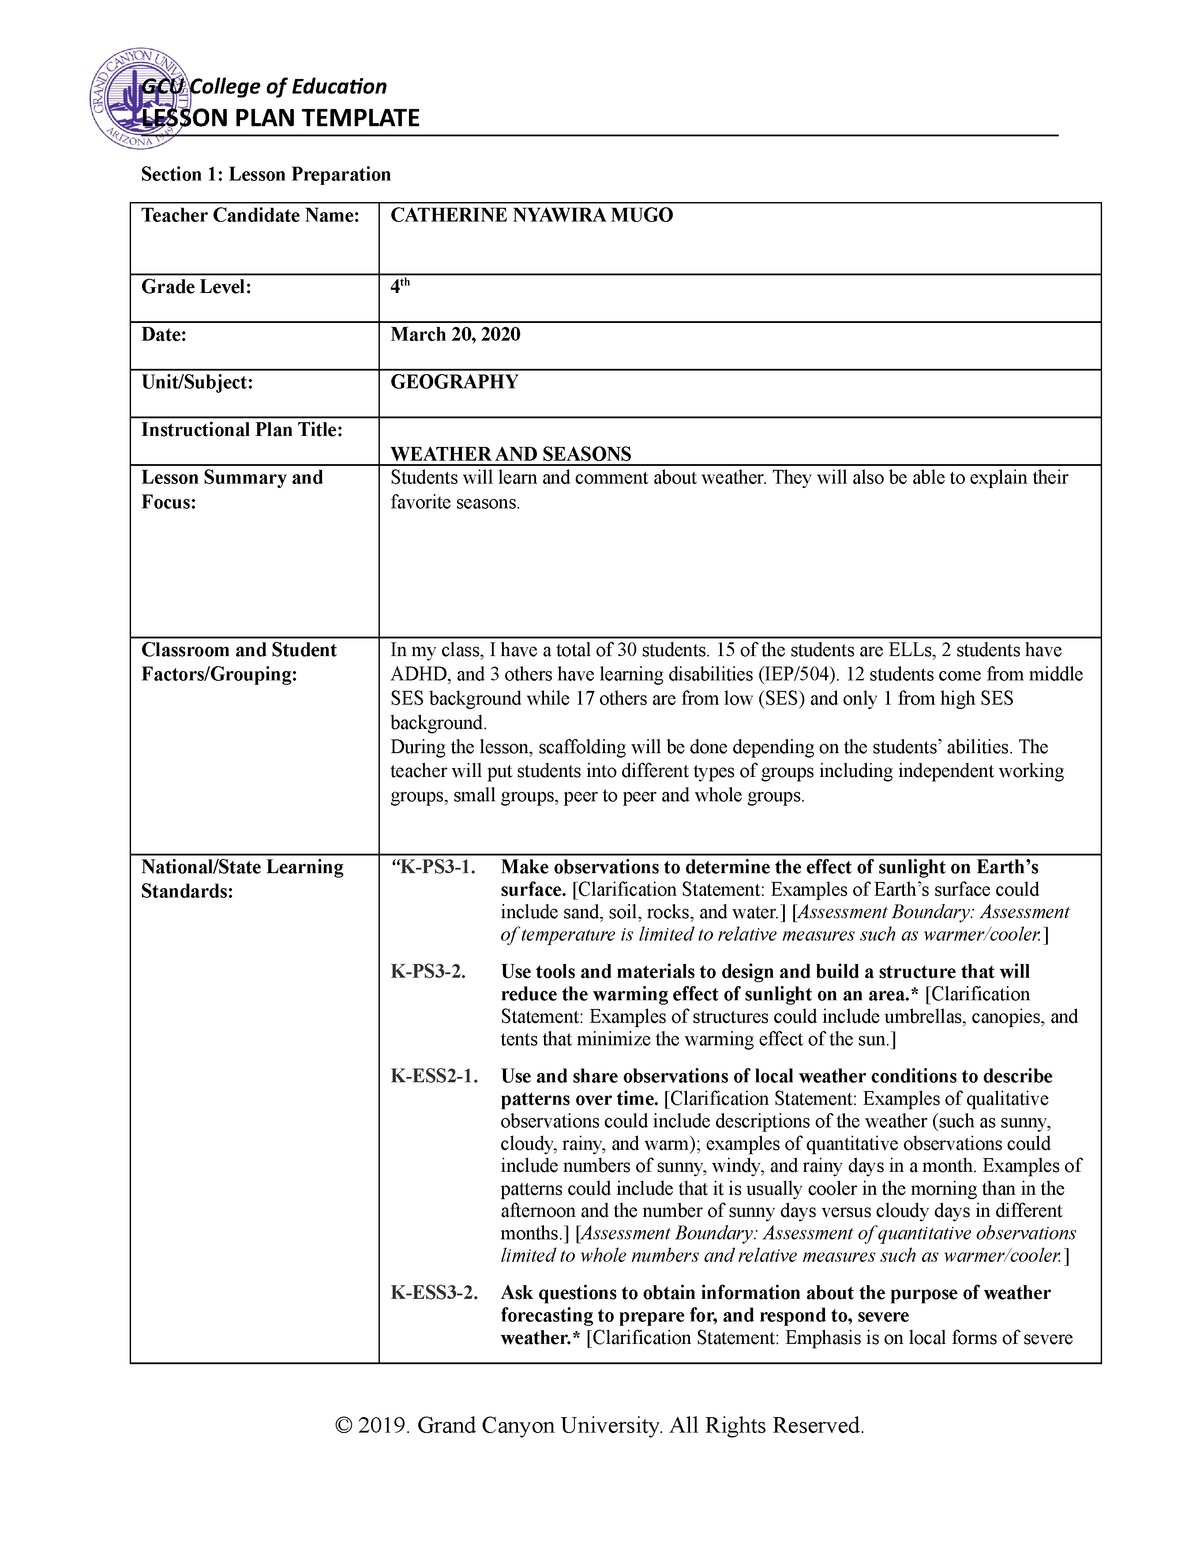 Coe lesson plan template LESSON PLAN TEMPLATE Section 1 Lesson